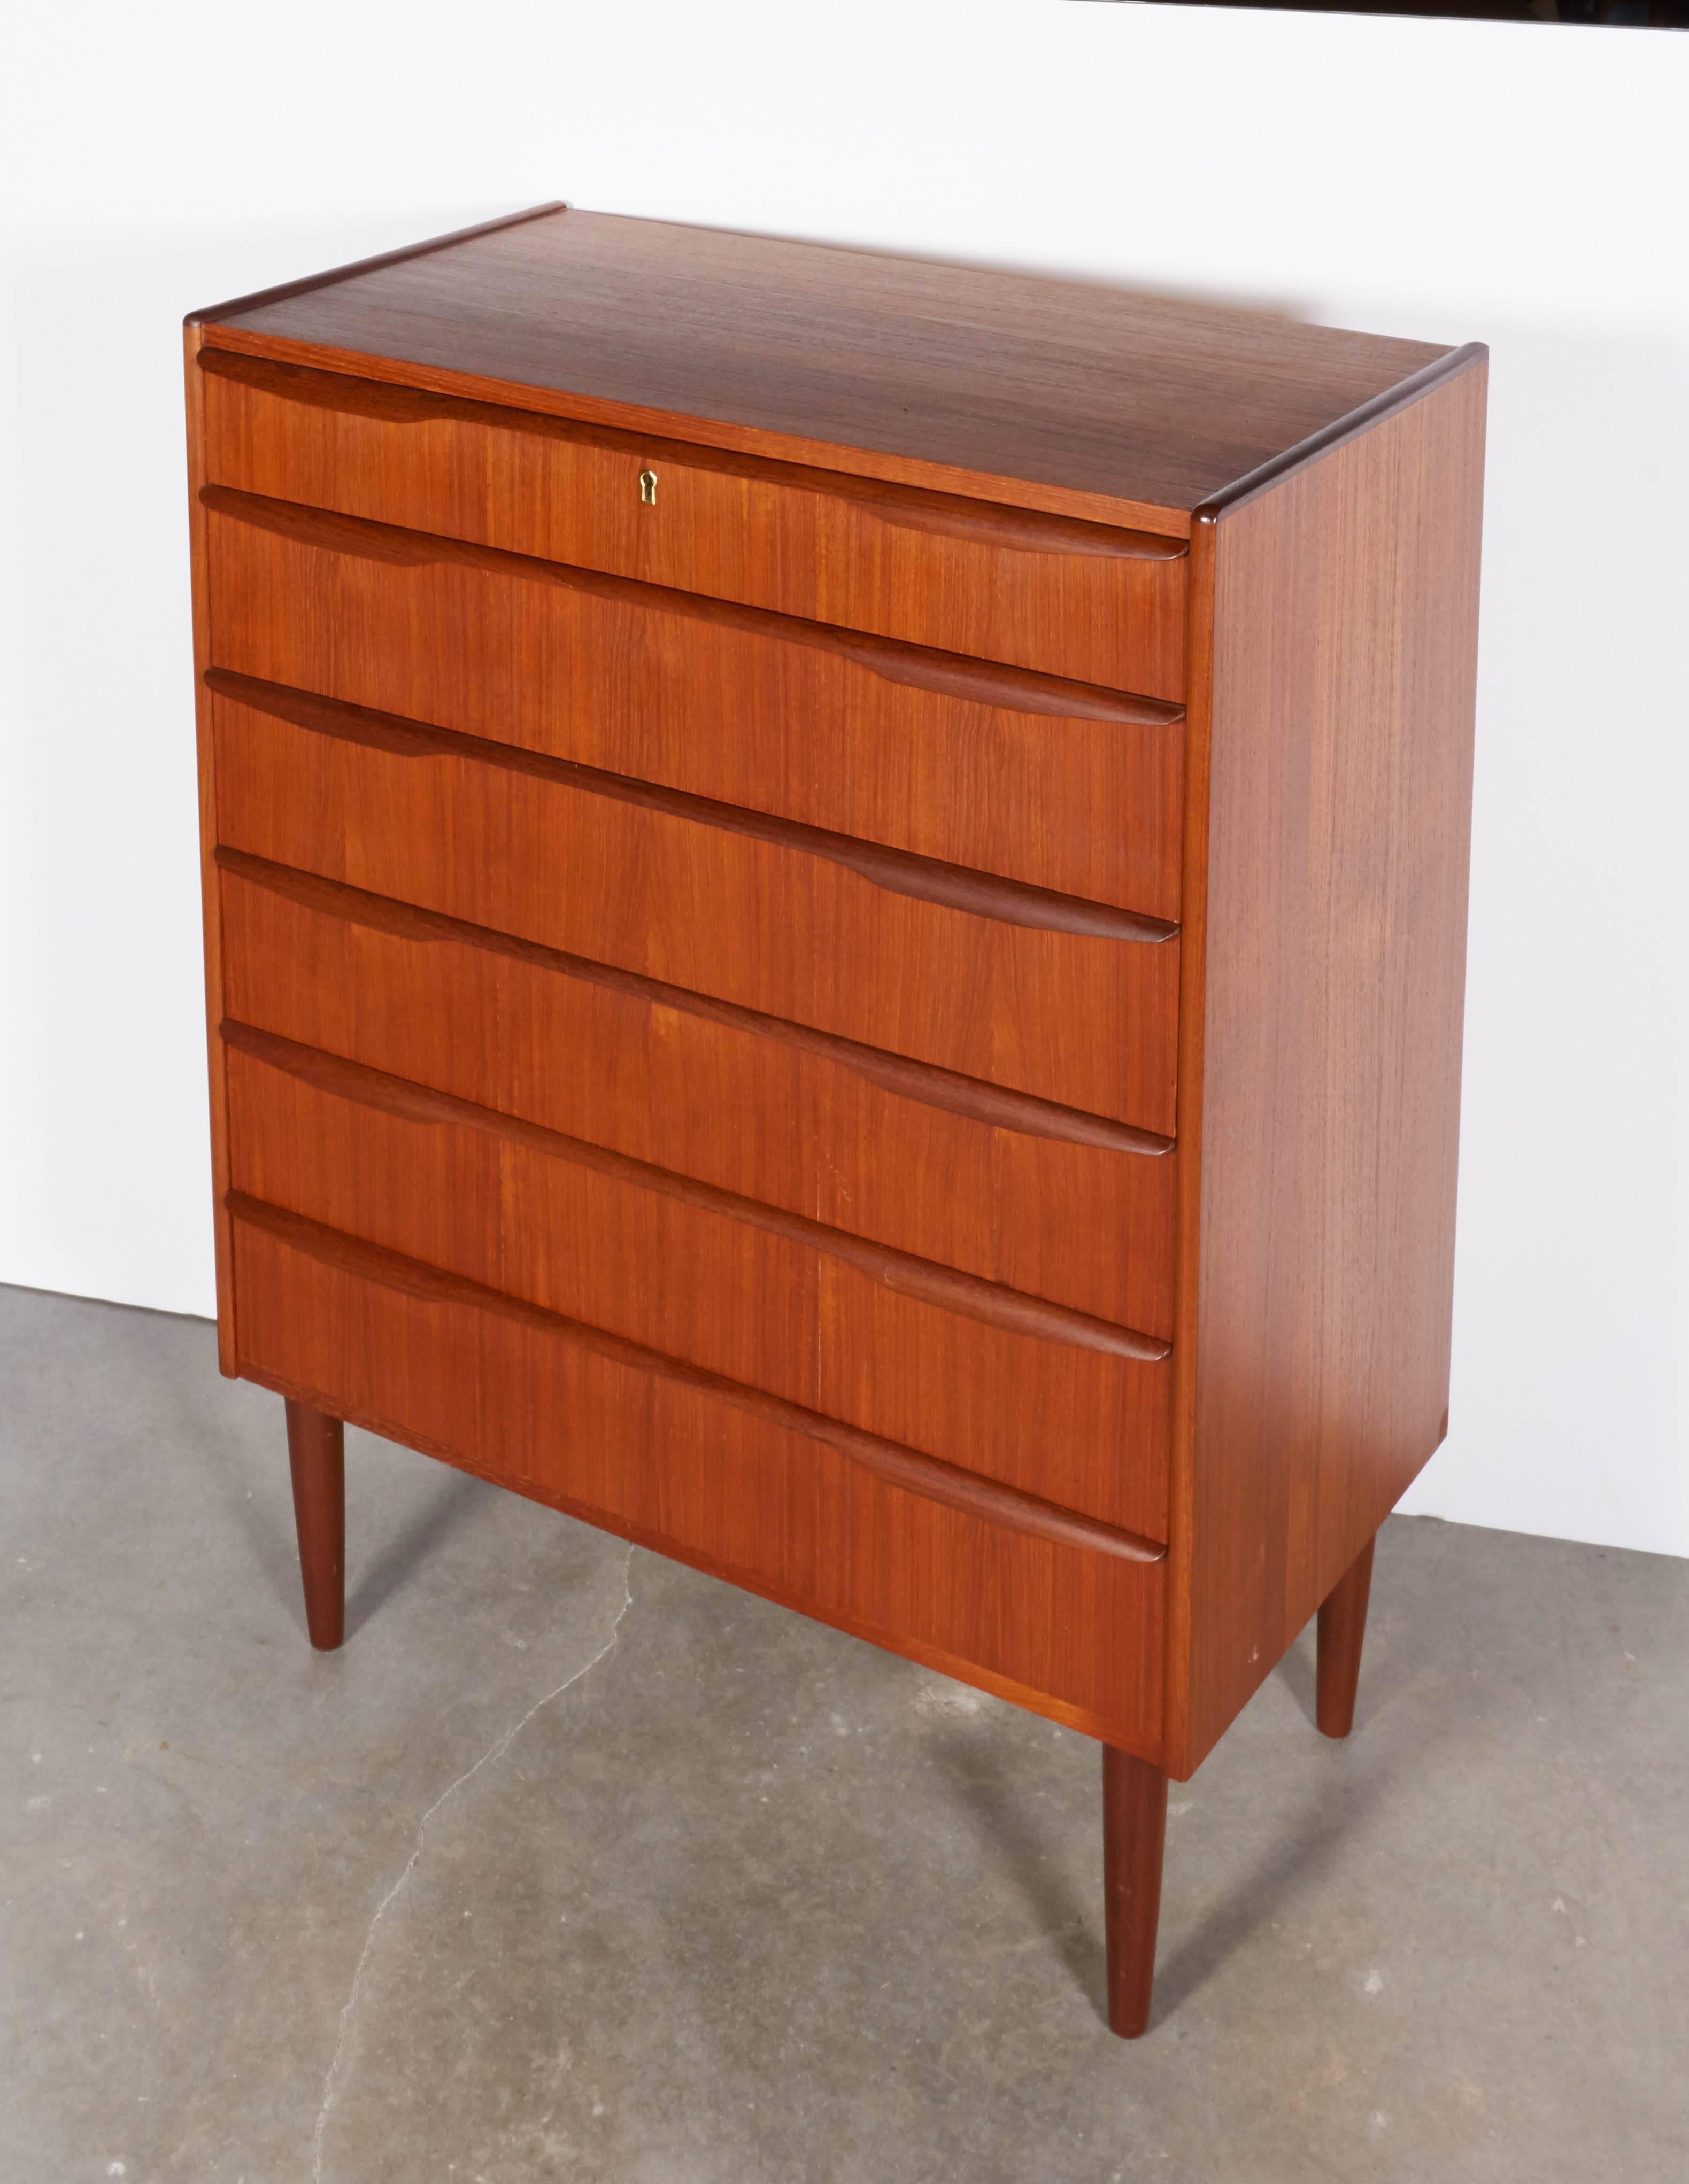 Vintage 1960s Mid Century Teak Dresser

This retro chest of drawers is in excellent condition and can be used anywhere you need extra storage. Recently I've seen people use these in hallways for linen storage, in entry ways for hats, scarves, keys